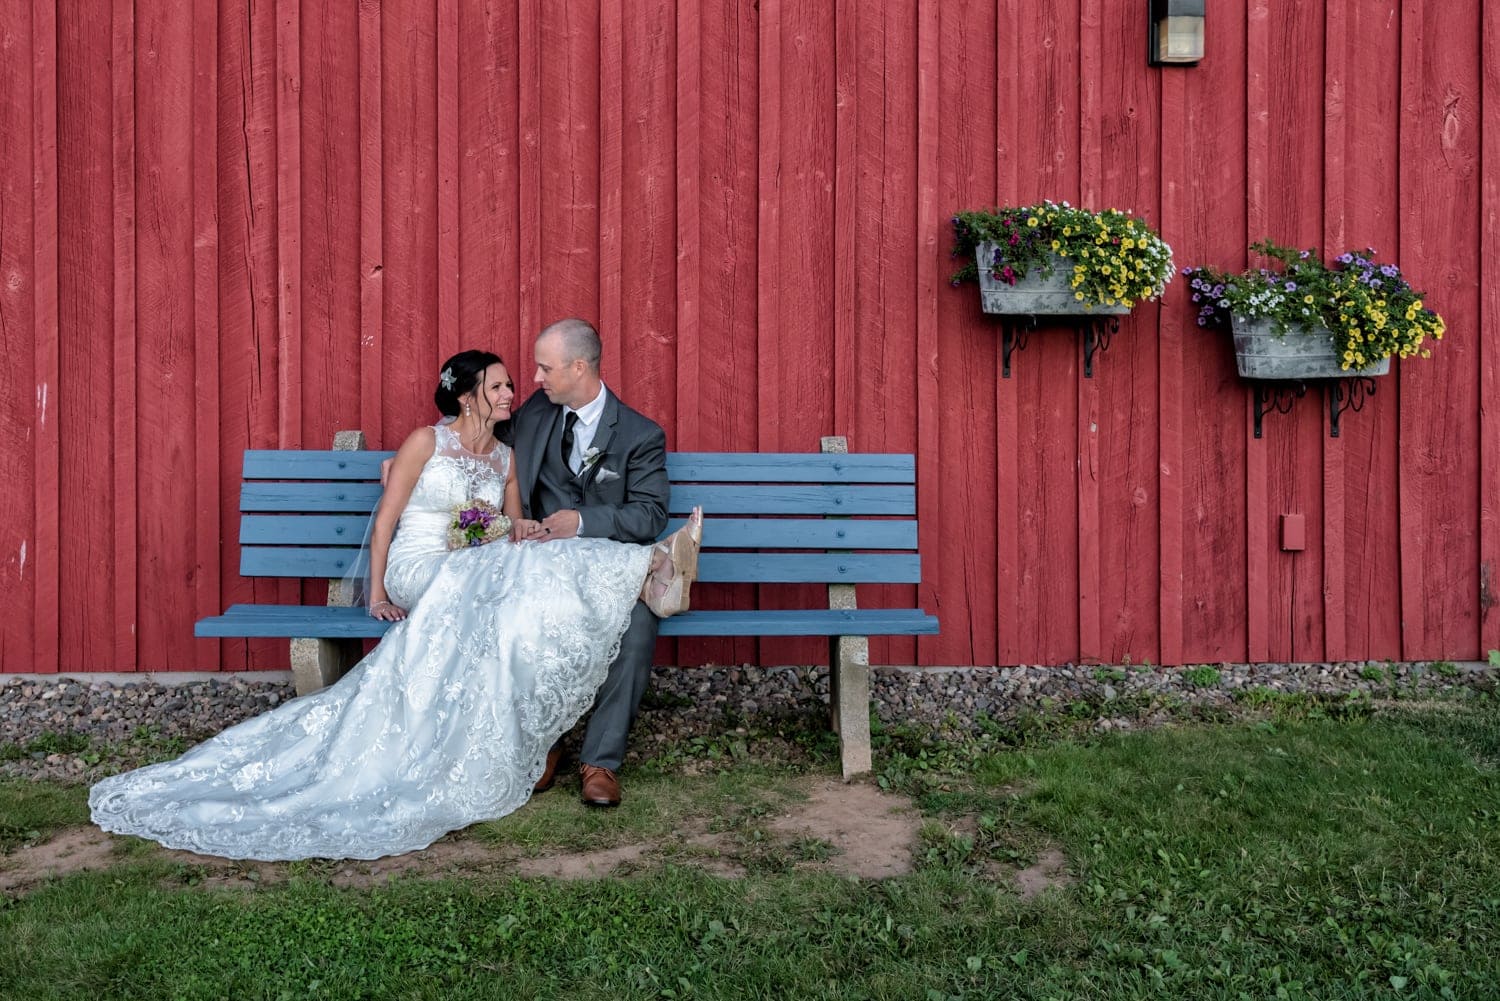 The bride and groom sitting on a wooden blue bench against the Heritage Barn at the Old Orchard Inn, Wolfville NS.